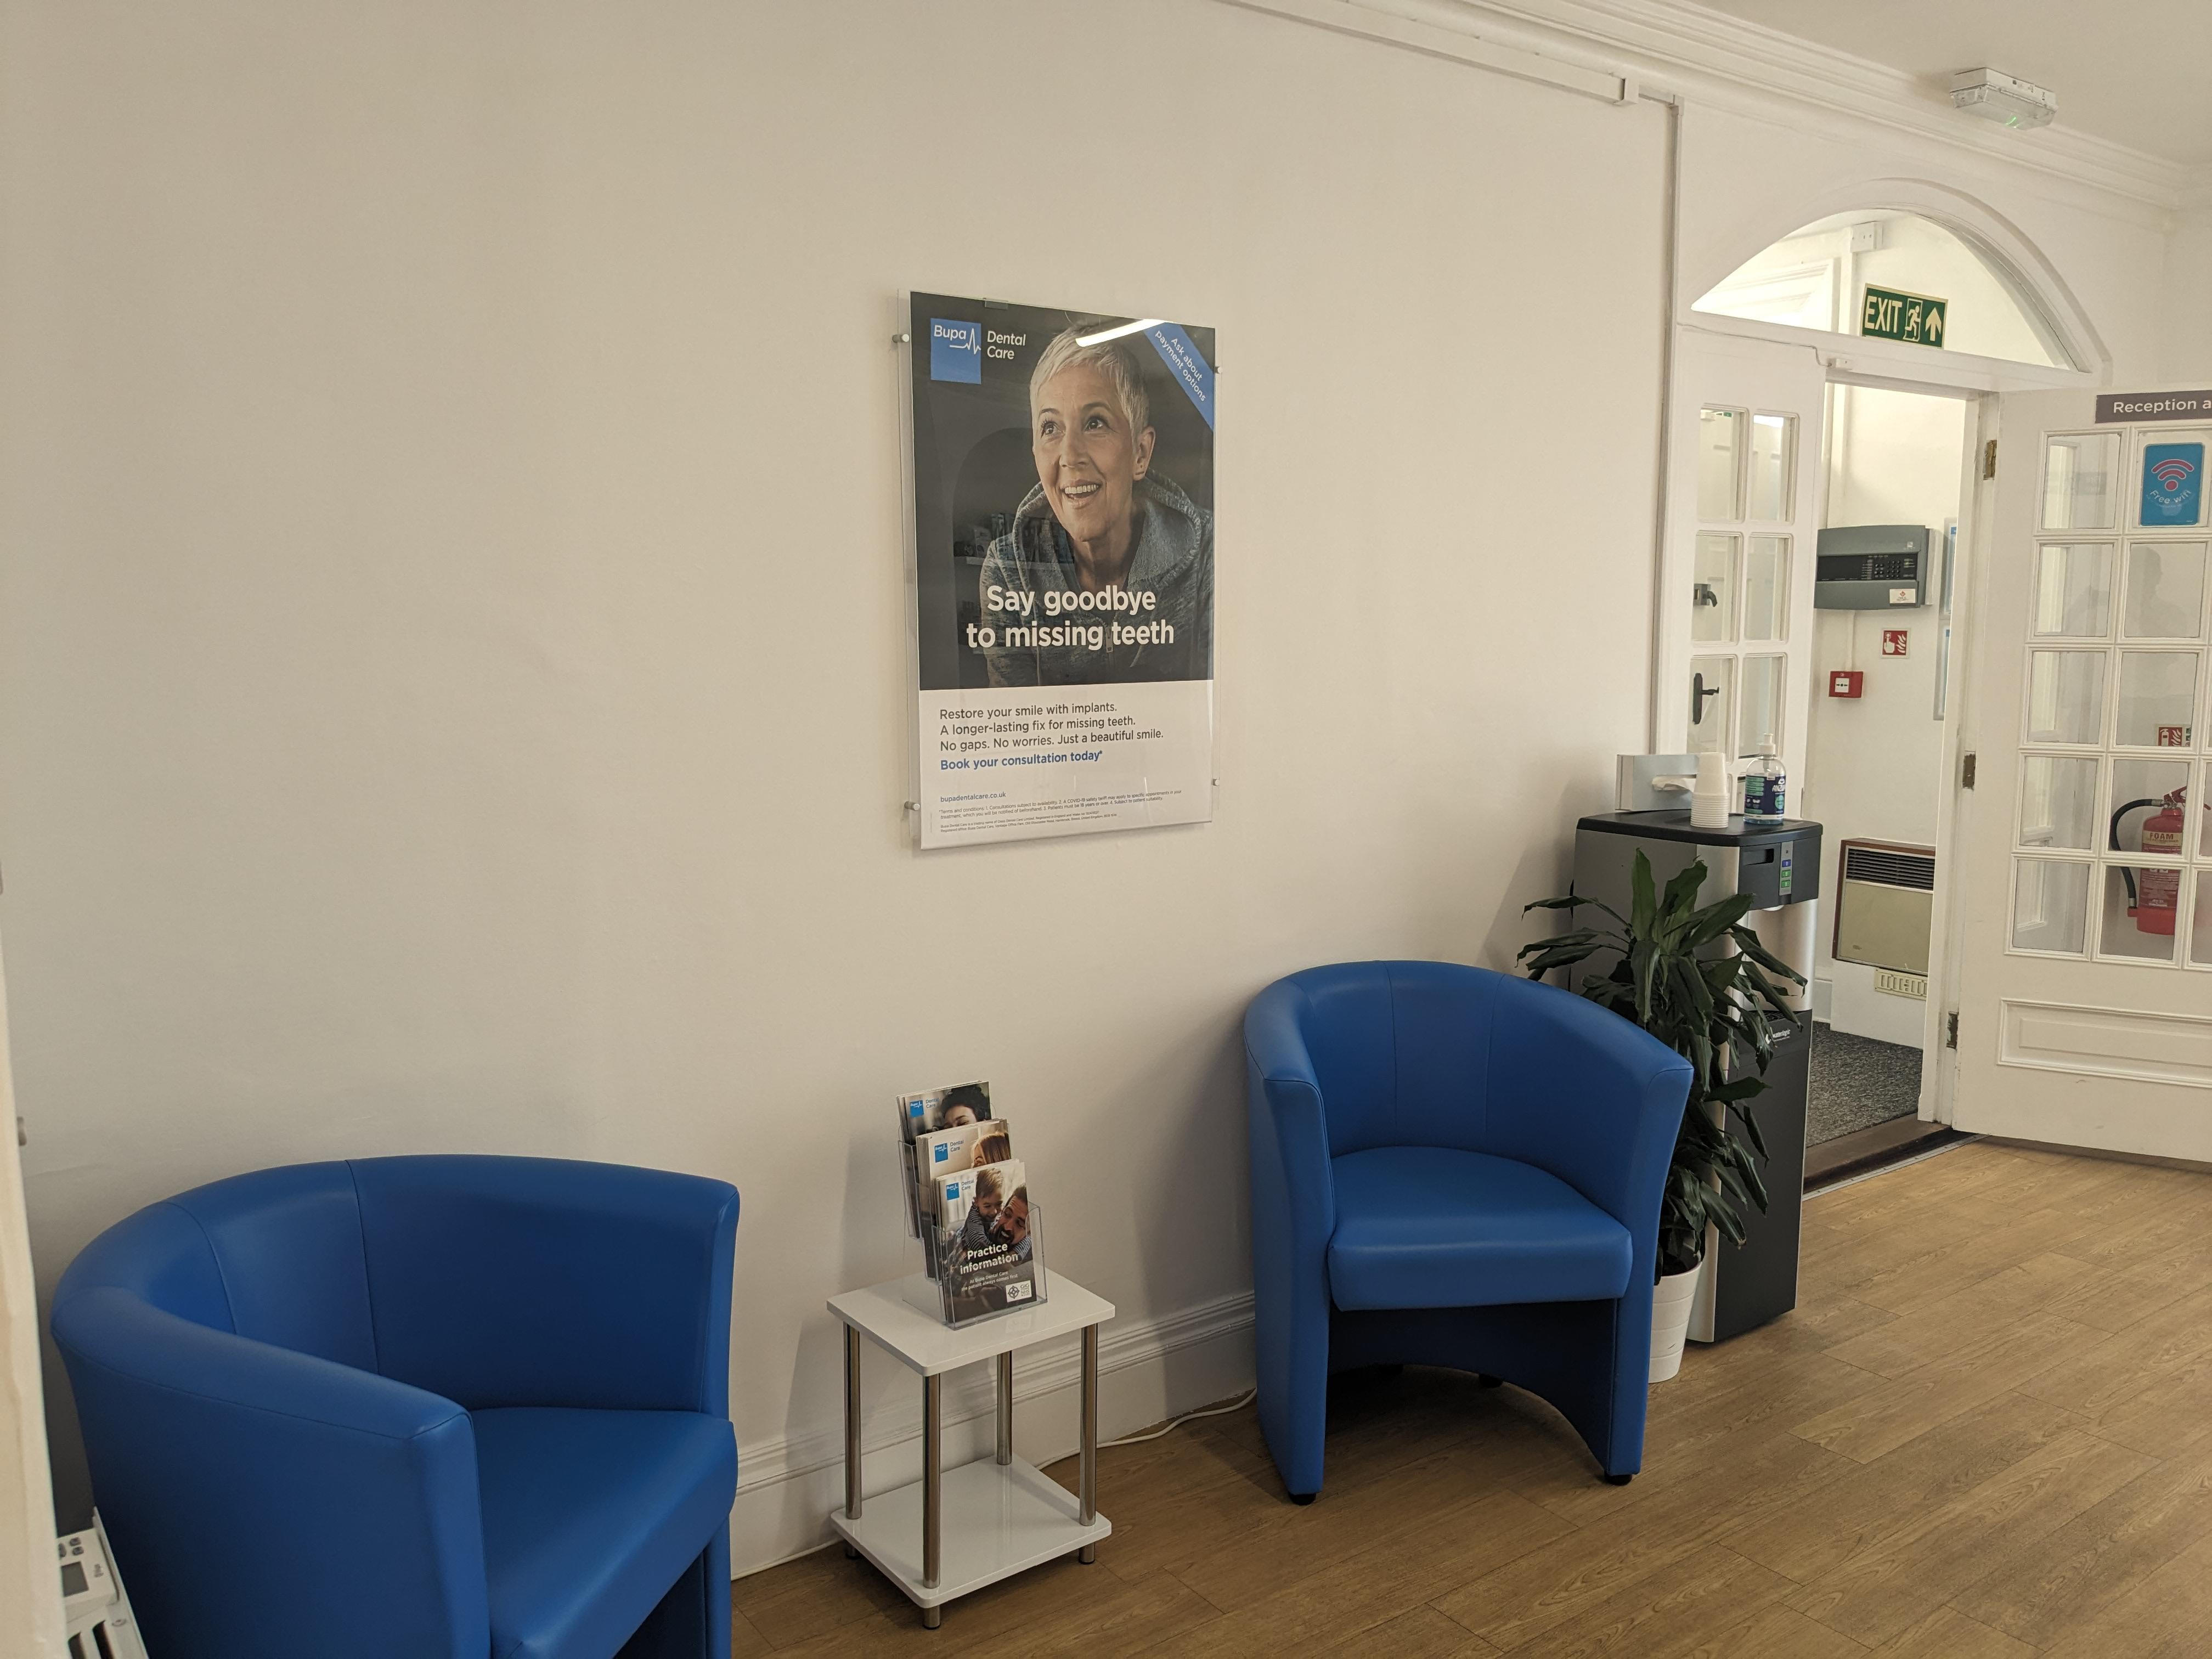 Images Bupa Dental Care Chepstow